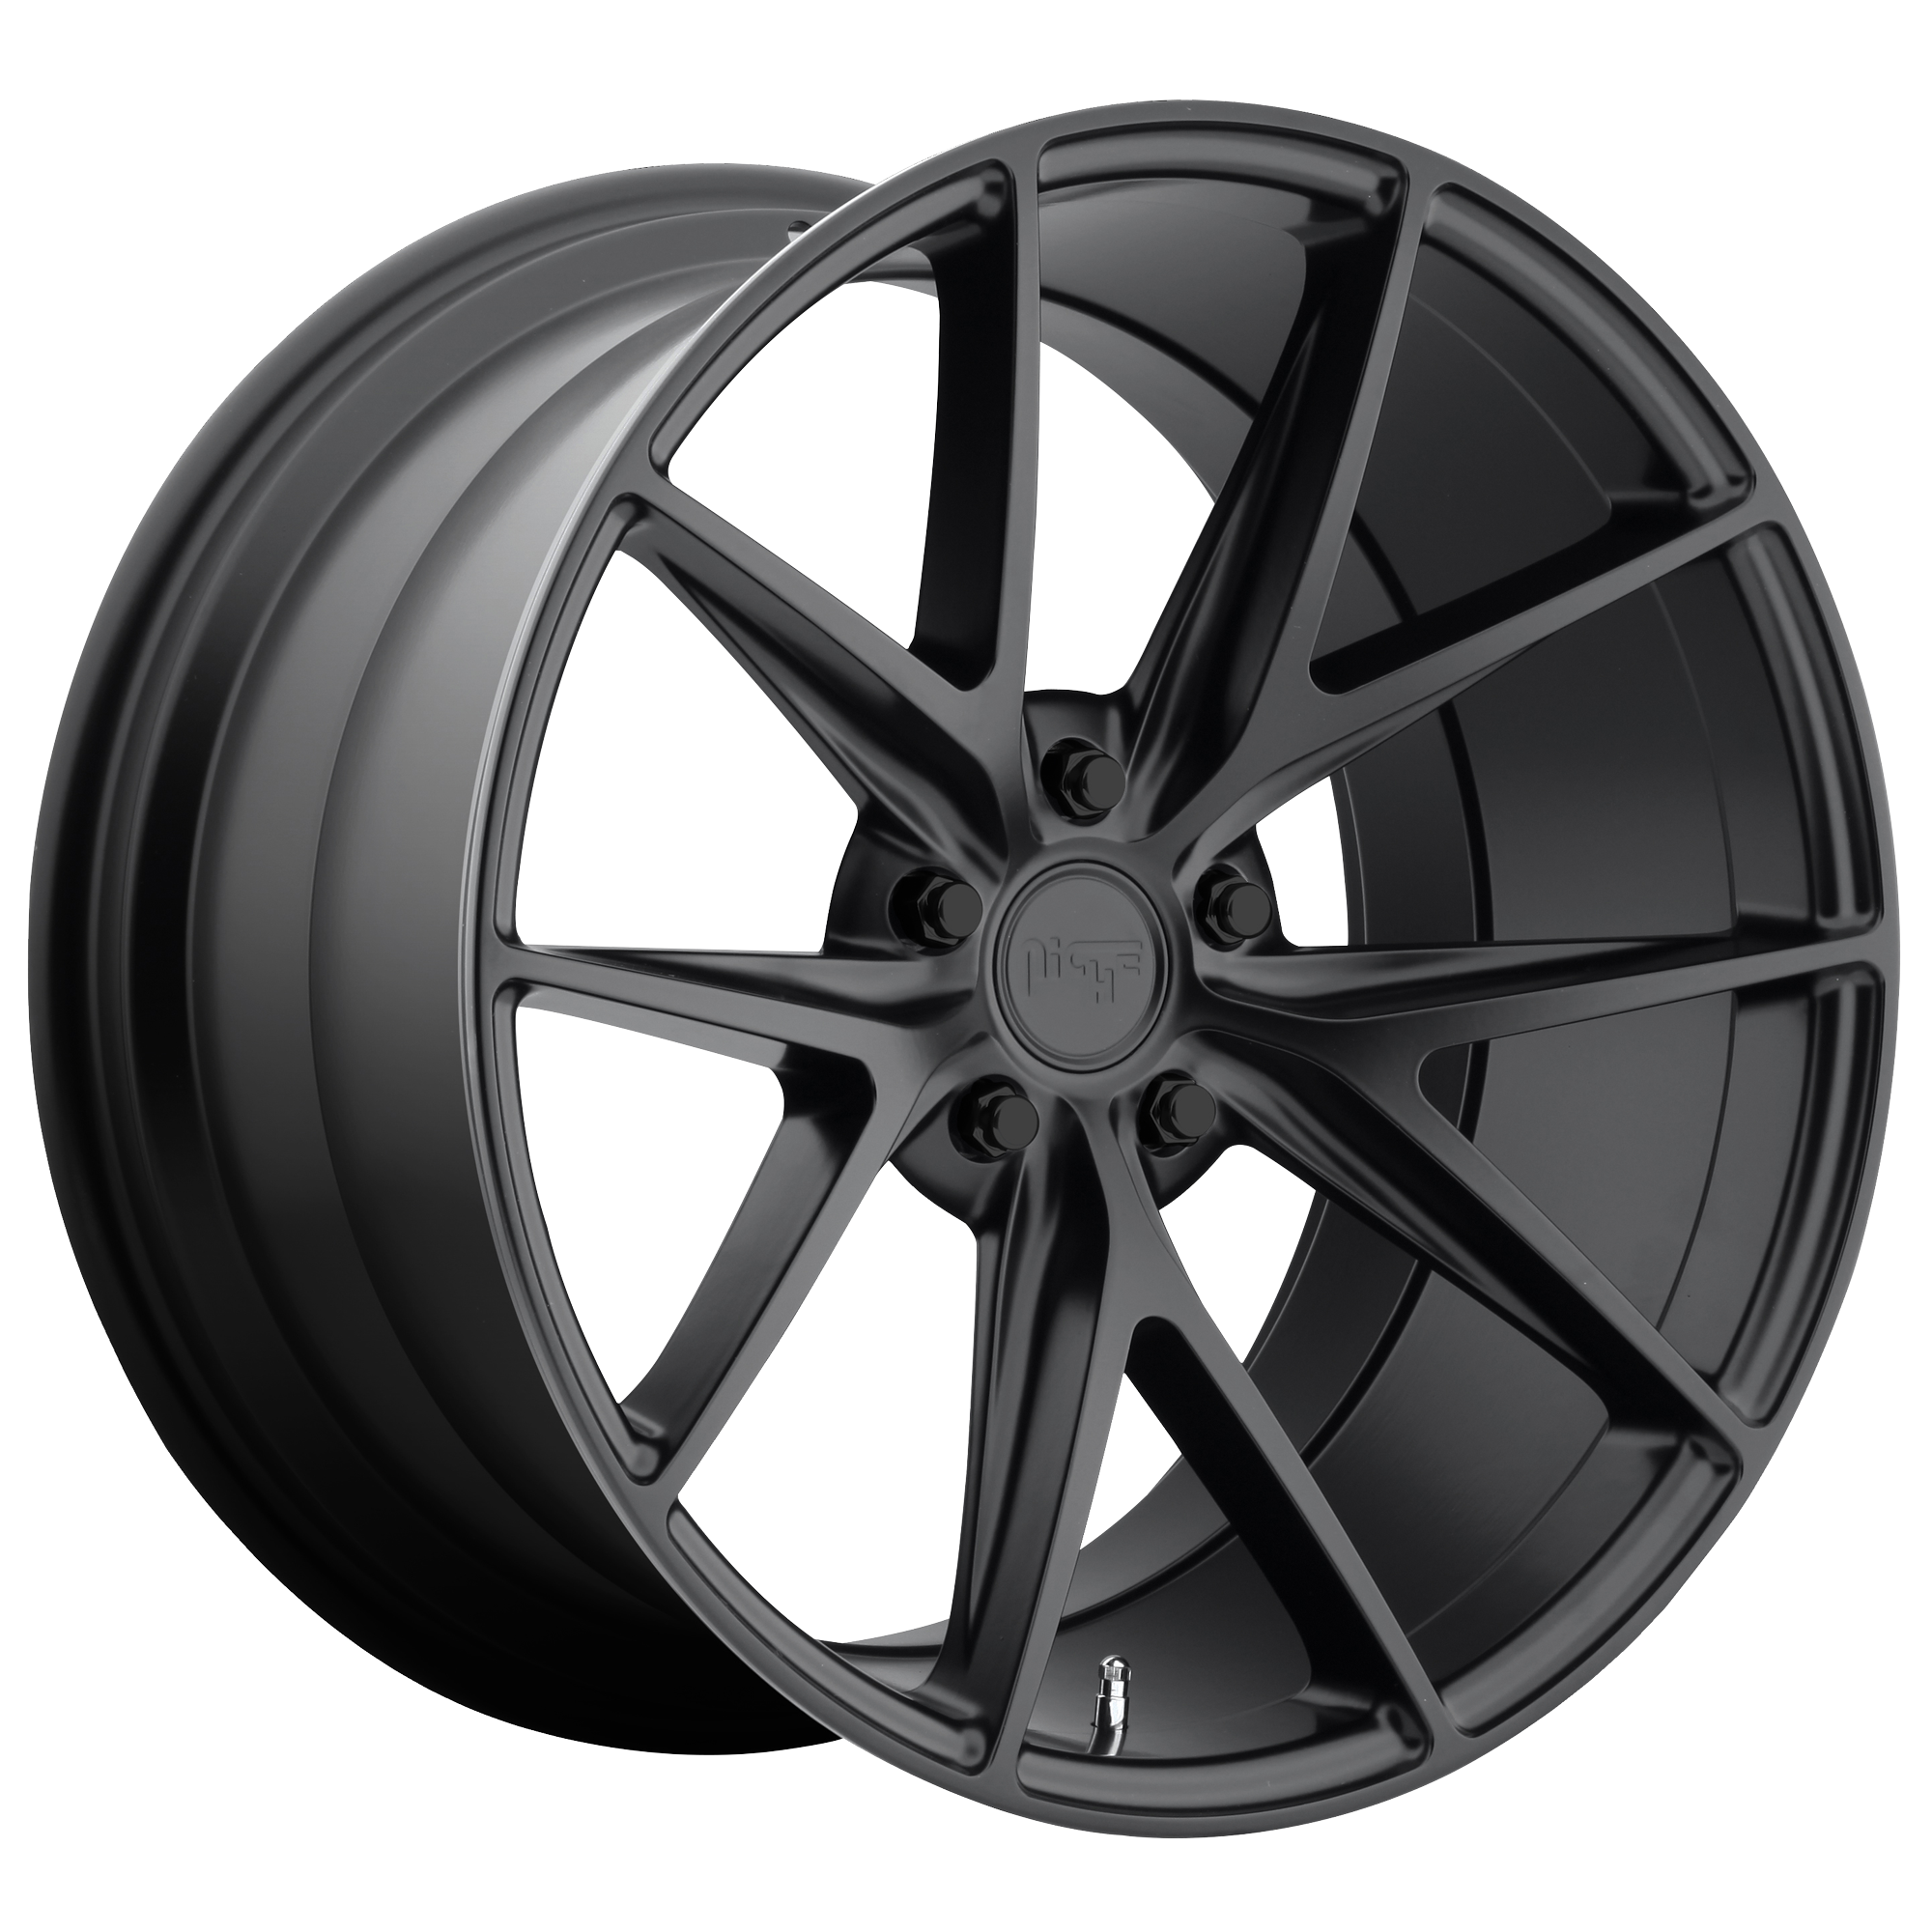 MISANO 17x8 5x120.00 MATTE BLACK (40 mm) - Tires and Engine Performance